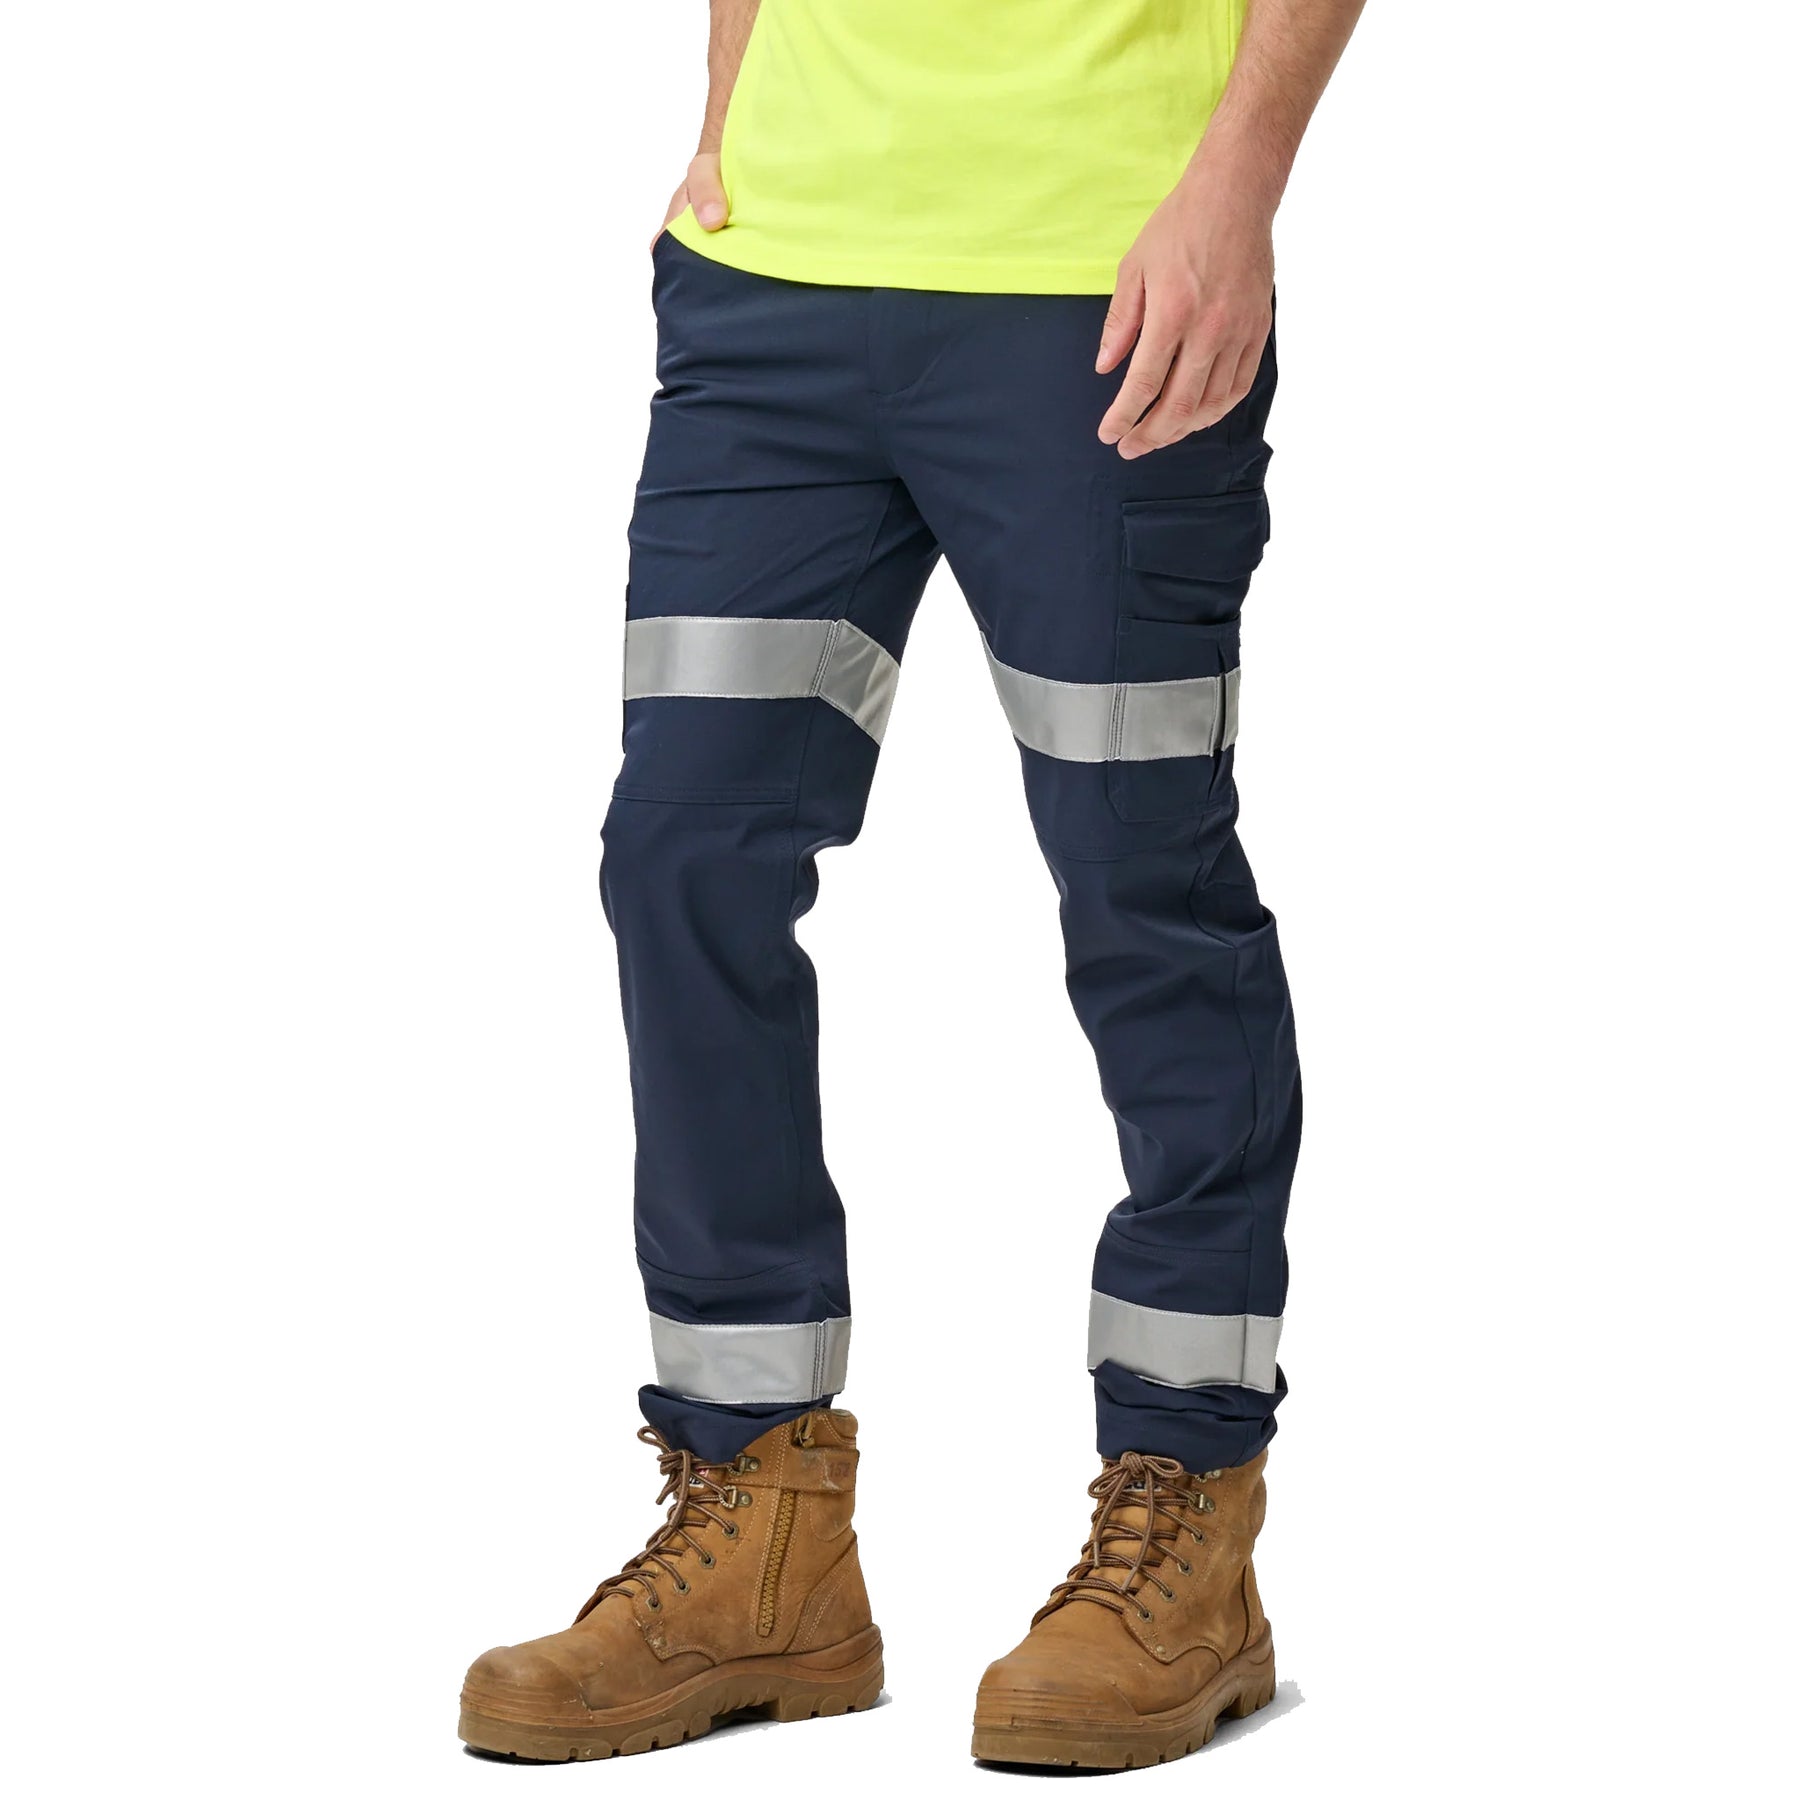 elwd mens light reflective pant in navy